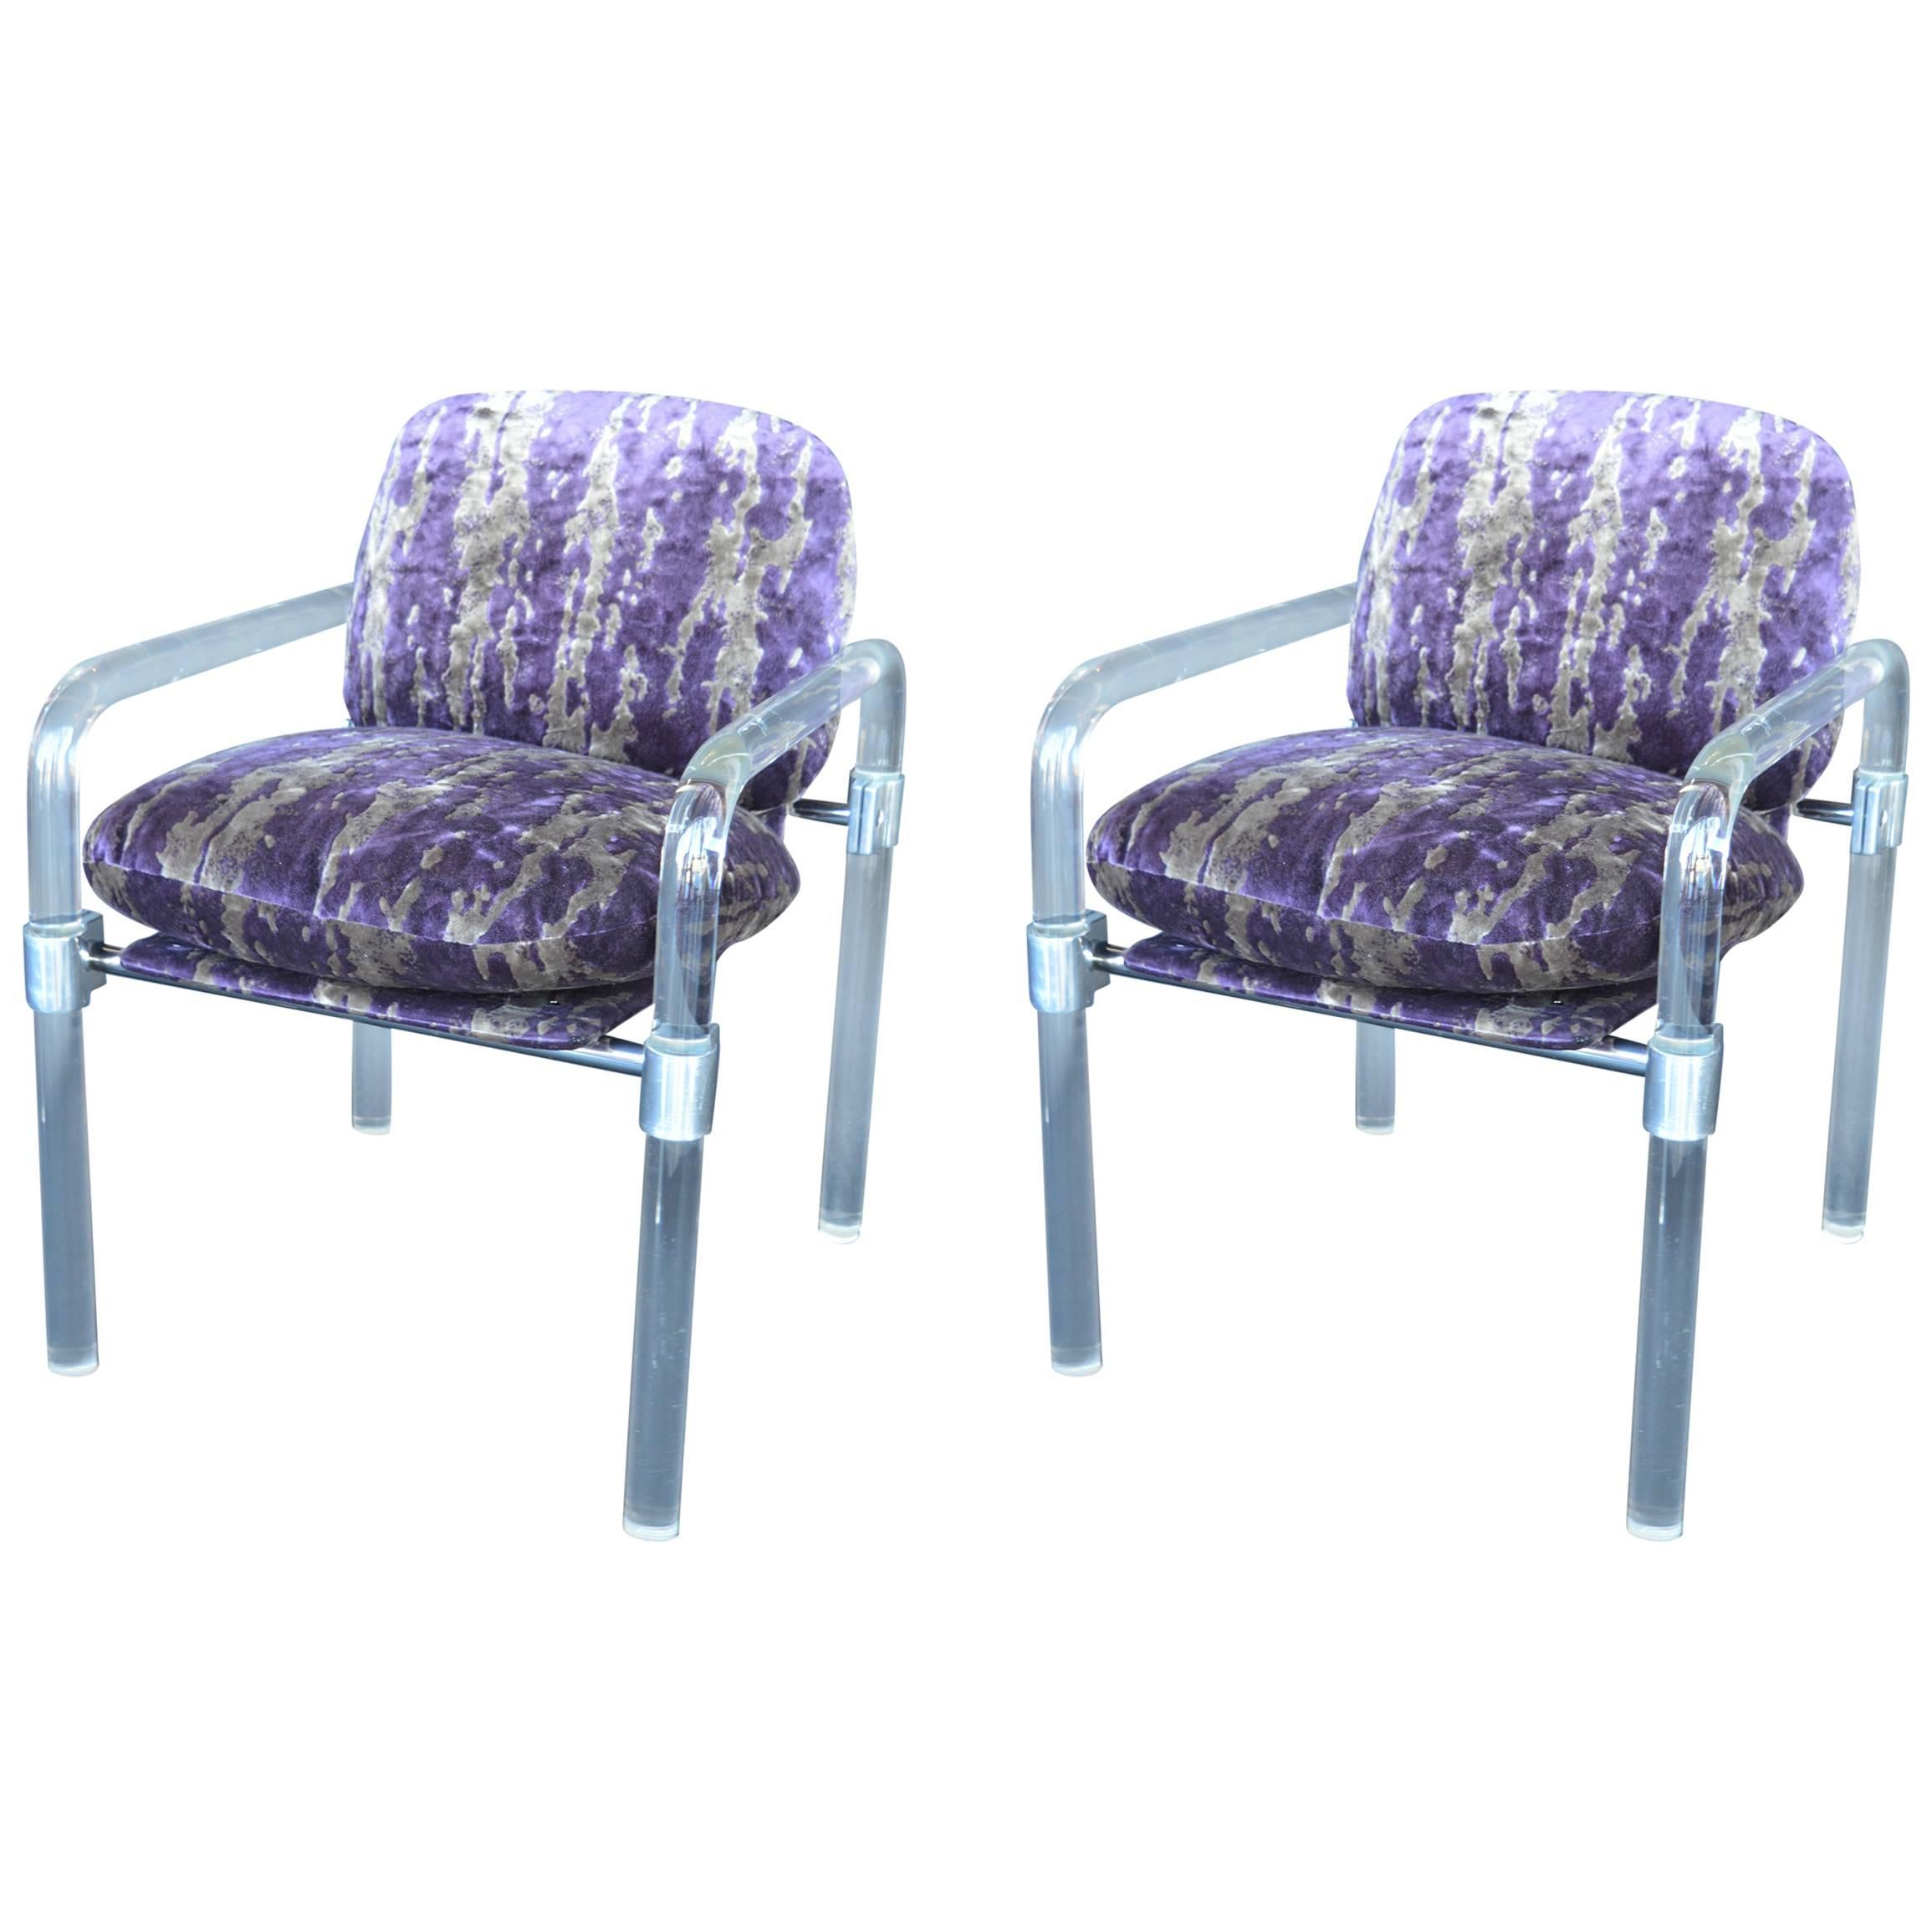 Pair of "Pipe Line Series ii Chairs" in Molded Lucite by Jeff Messerschmidt For Sale